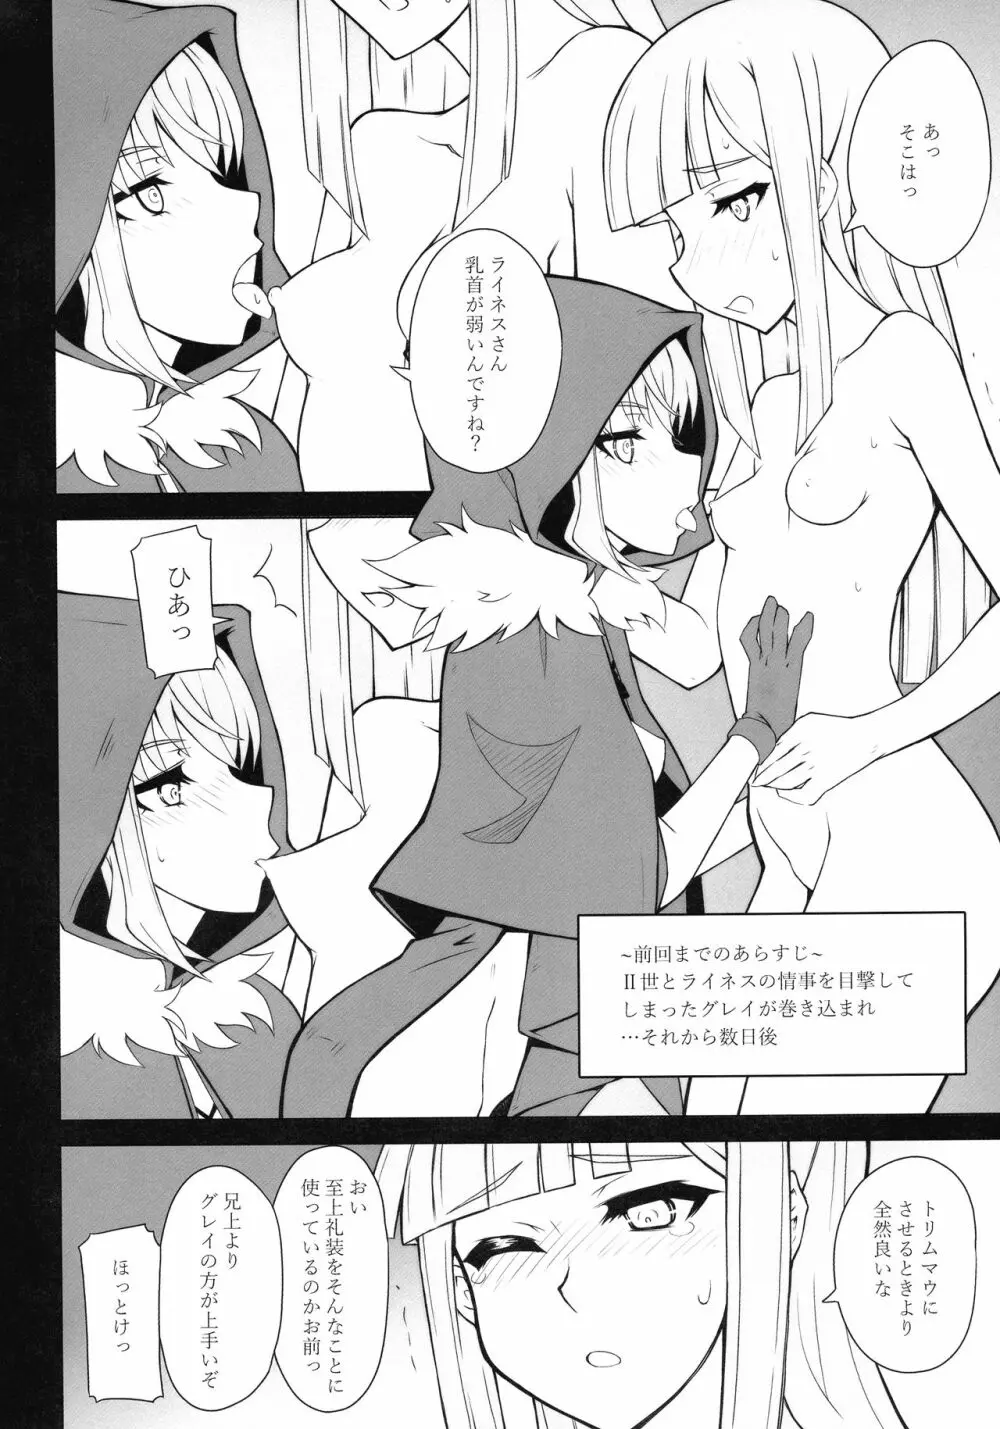 LADY REINES TIMES VOL.3 - page3